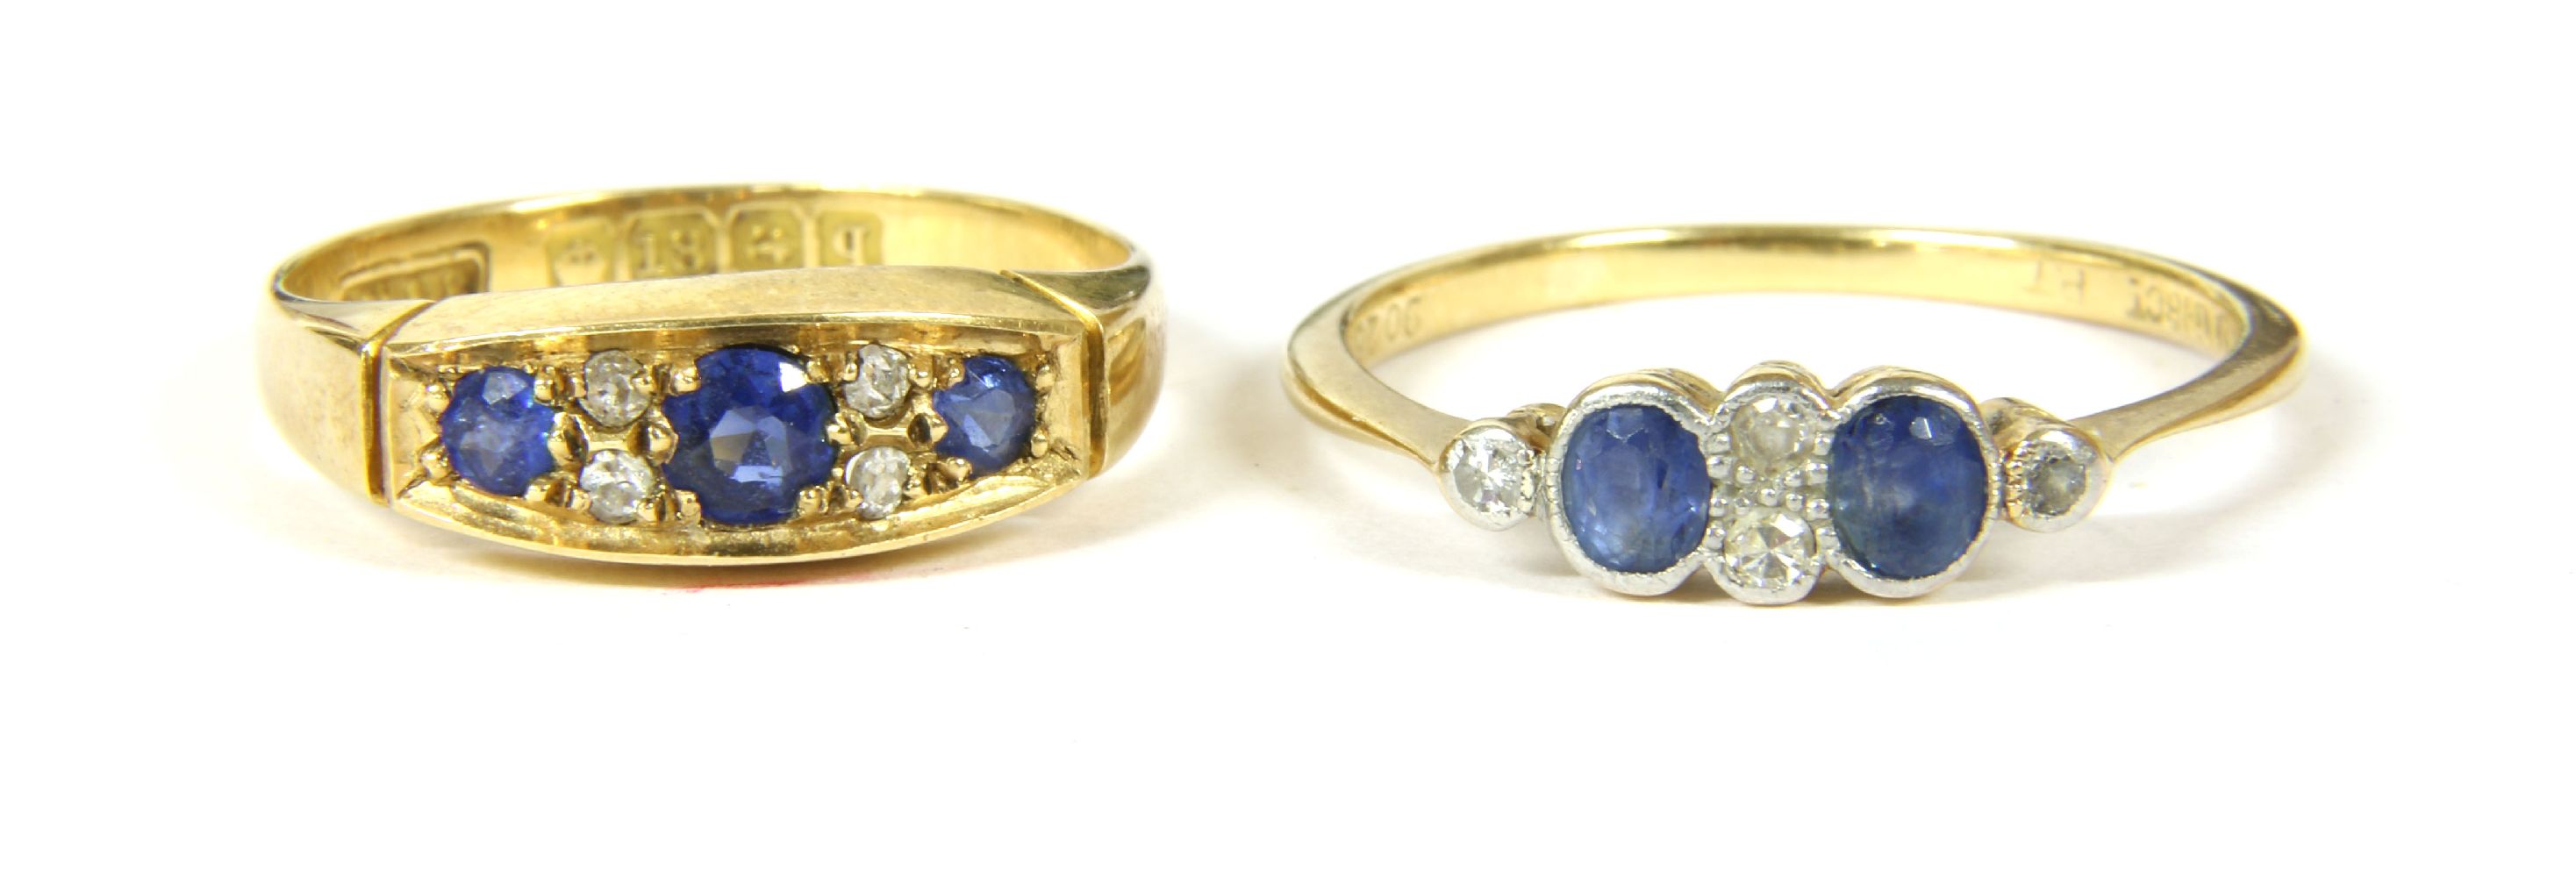 An 18ct gold three stone sapphire ring, with pairs of diamond set points, size M½, 2.83g, and a gold